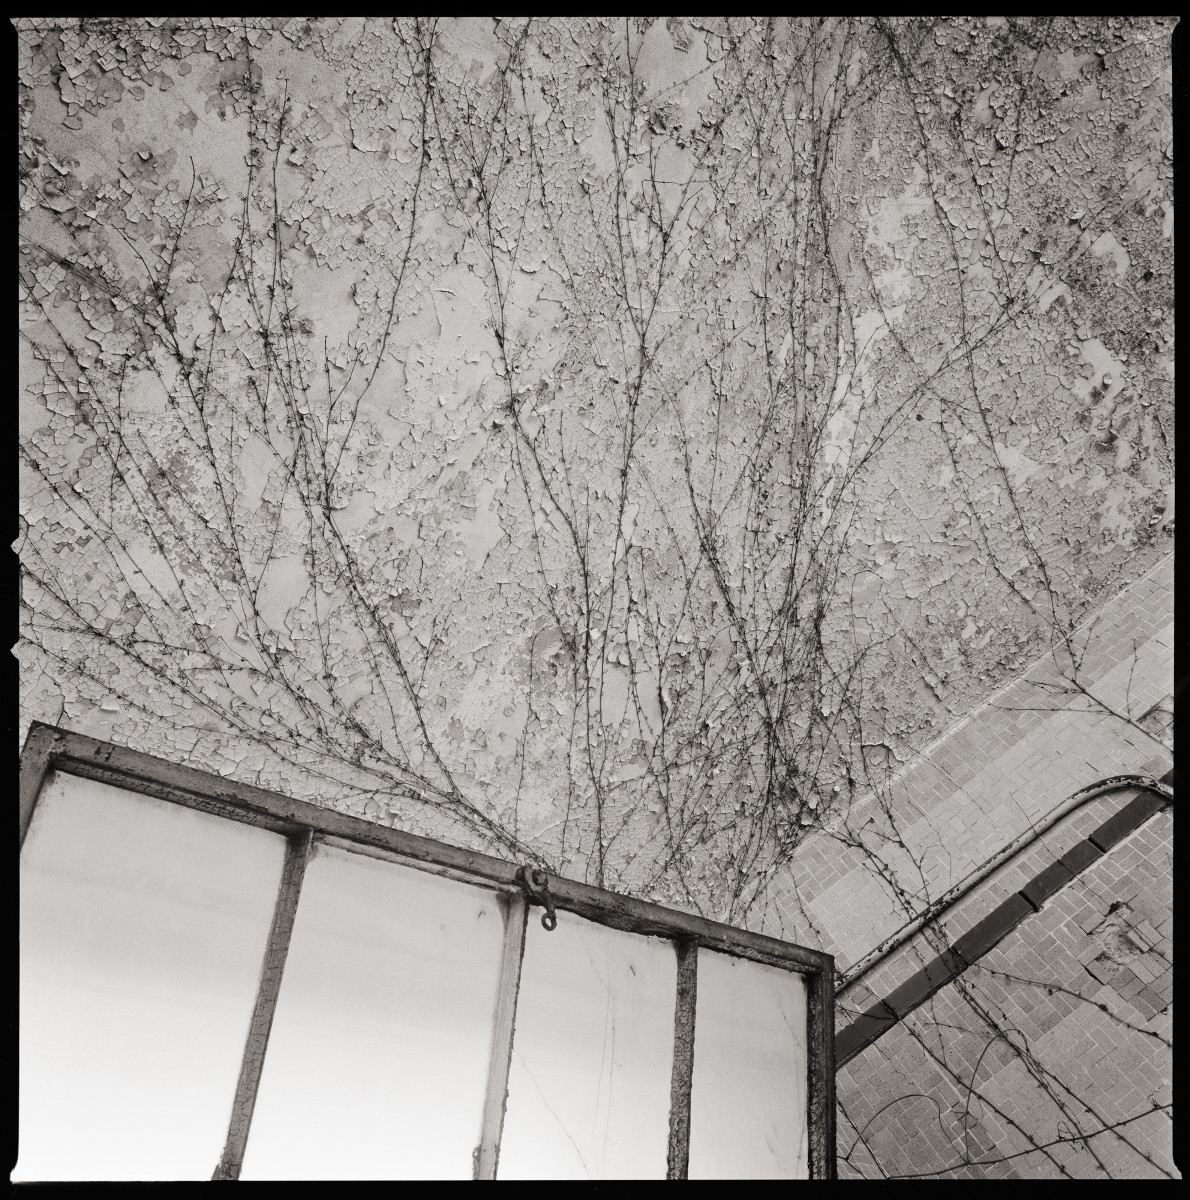 Untitled by Eric T. Kunsman  Image: ID: A black and white image shows a paint-cracked ceiling that has vines growing up the walls and across the ceiling.